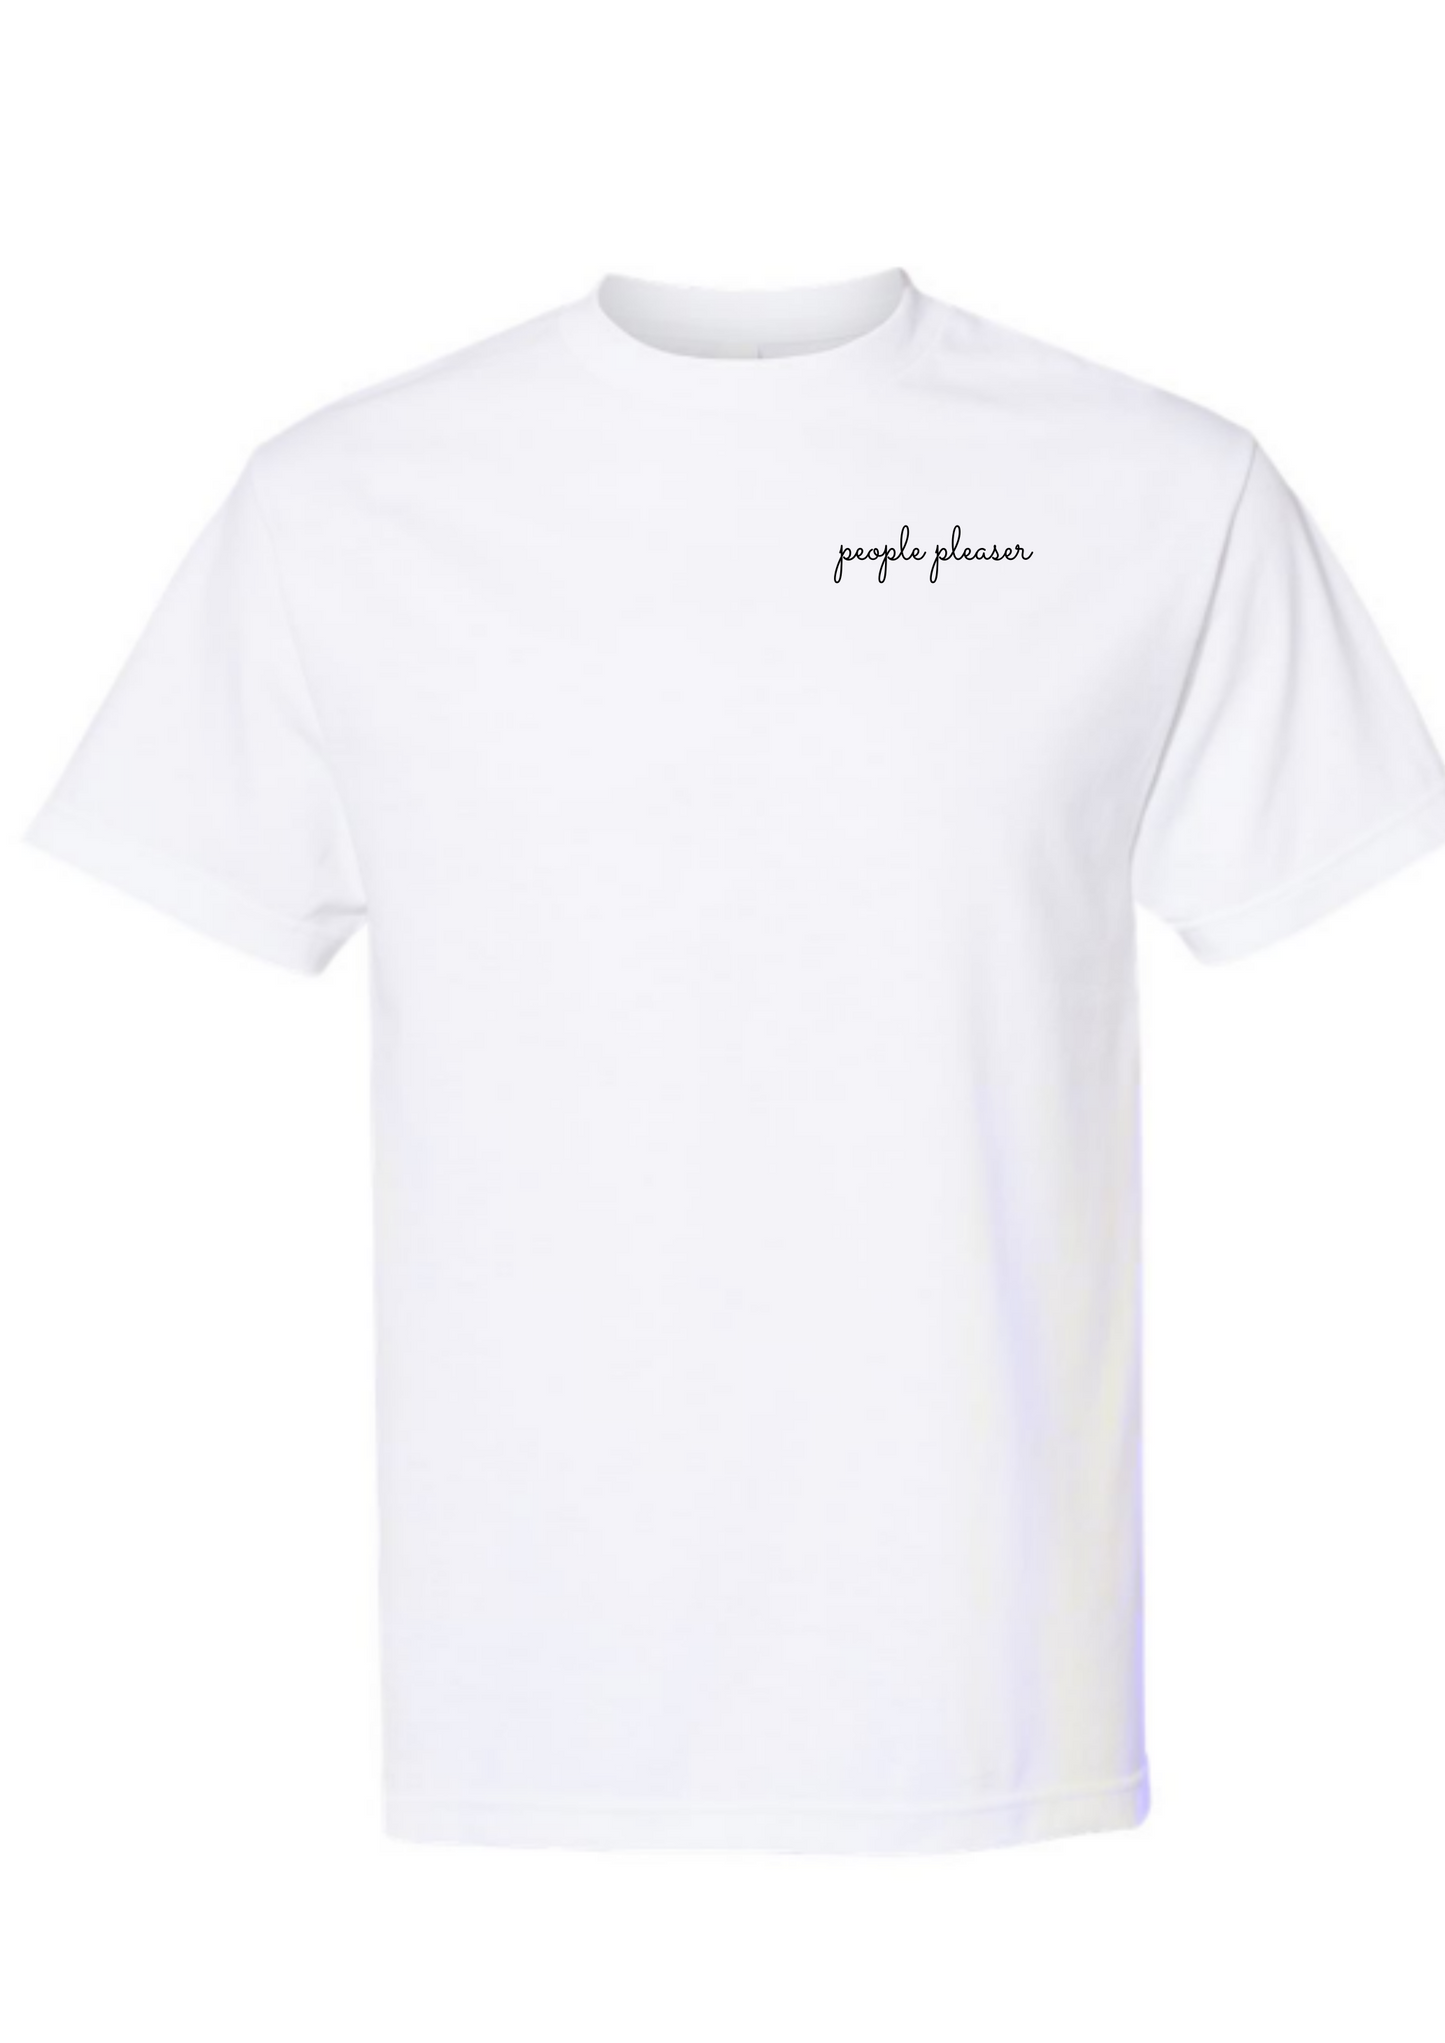 People Pleaser White T